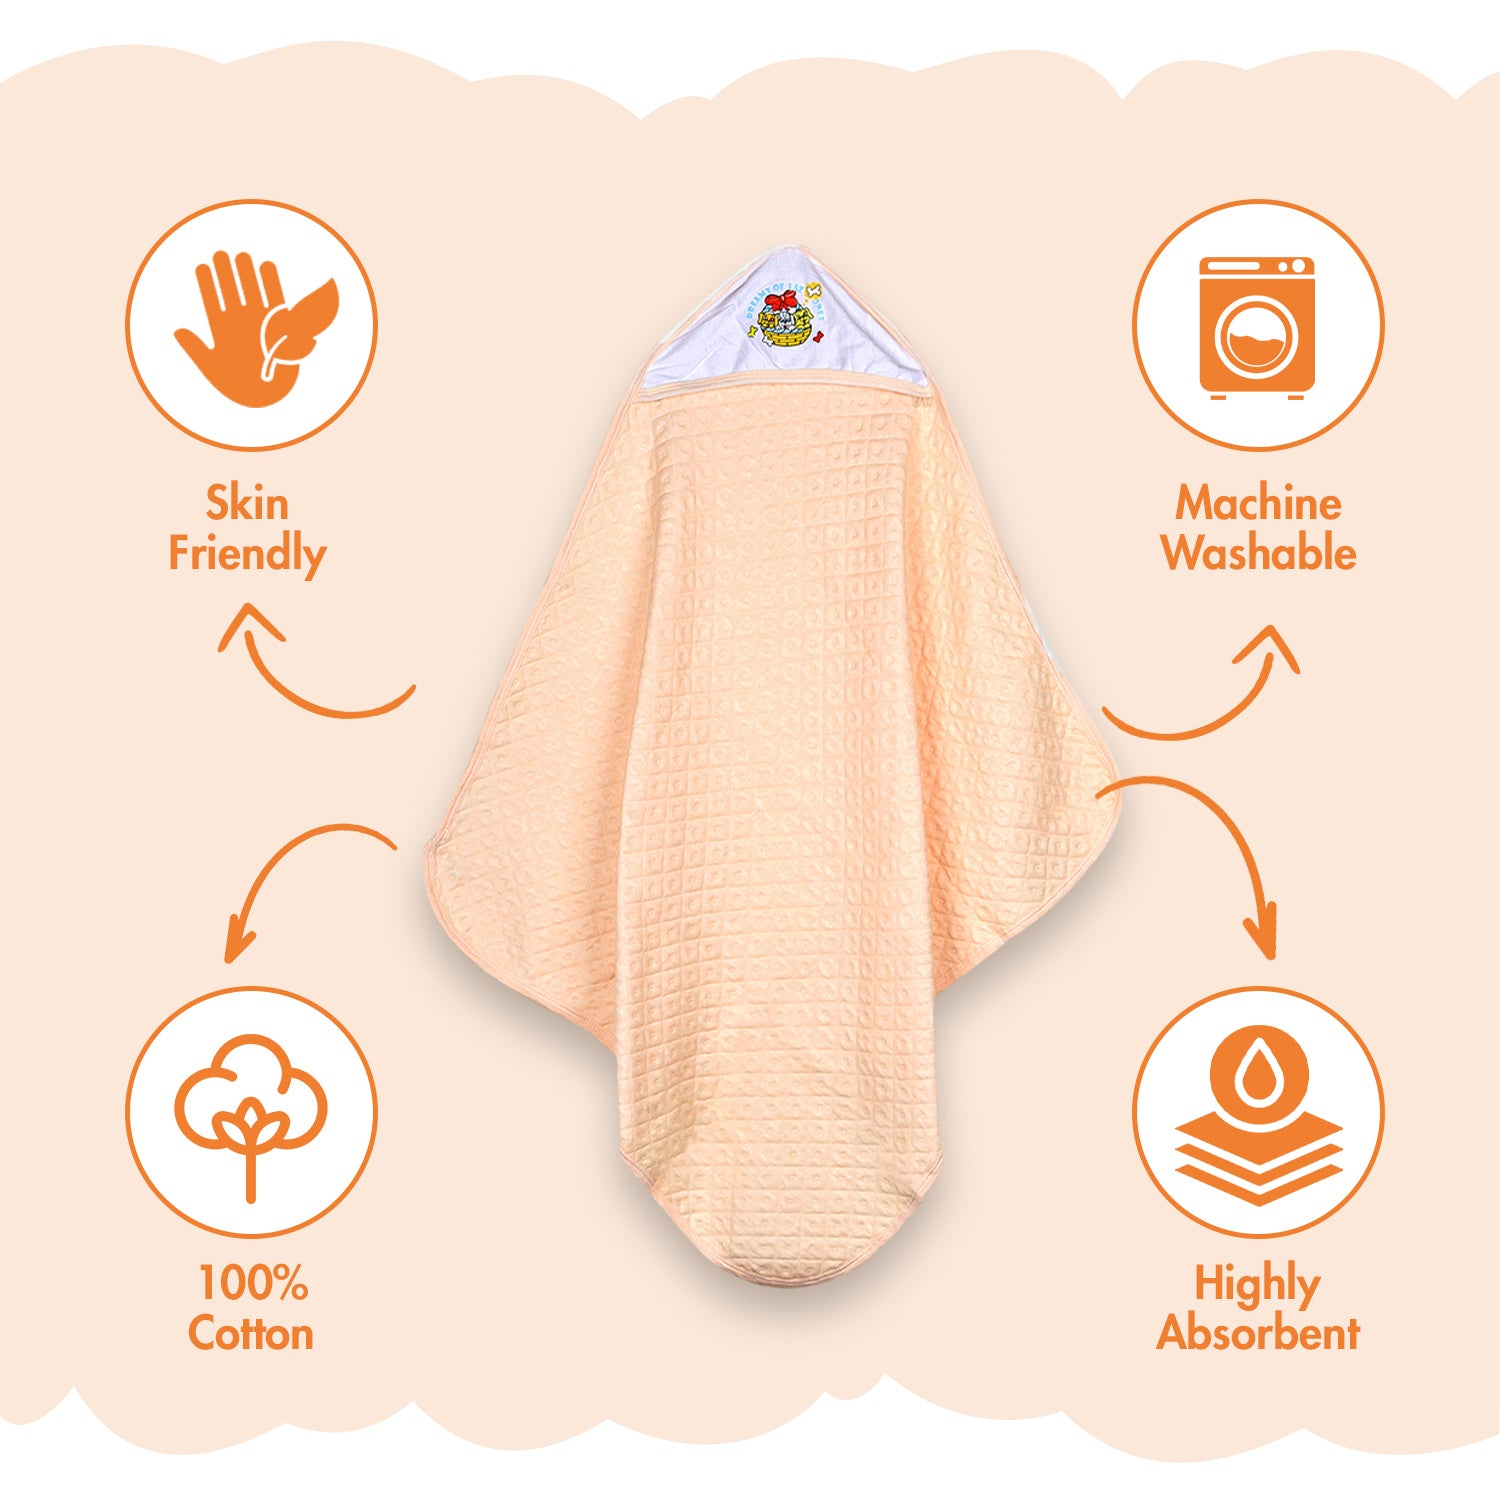 Moms Home New Born Organic Cotton Velcro Swaddle Wrap Gift Set of 3 Items -Pink